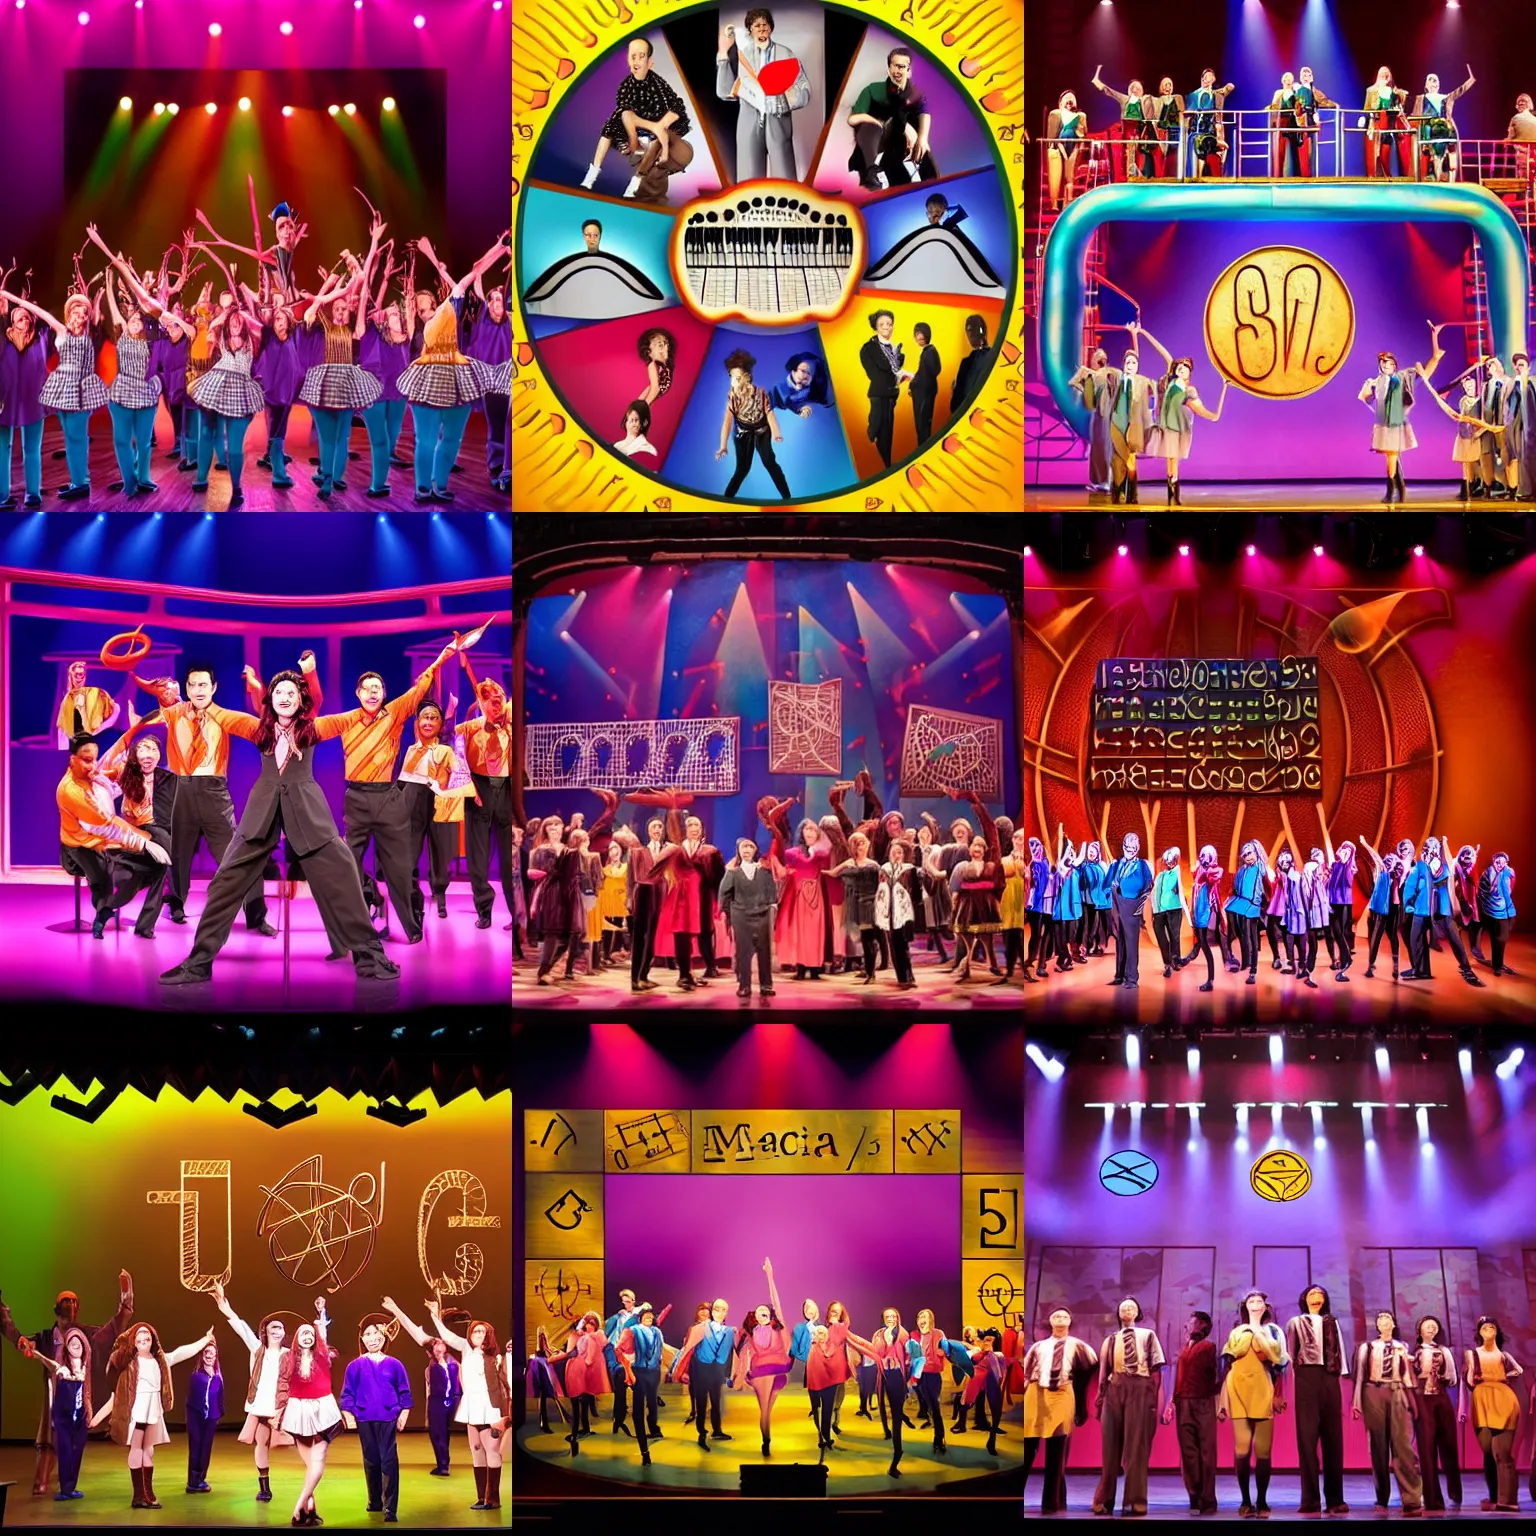 Prompt: mathematics the musical on broadway, full cast, math symbols in the background, promotional photo, stage lighting